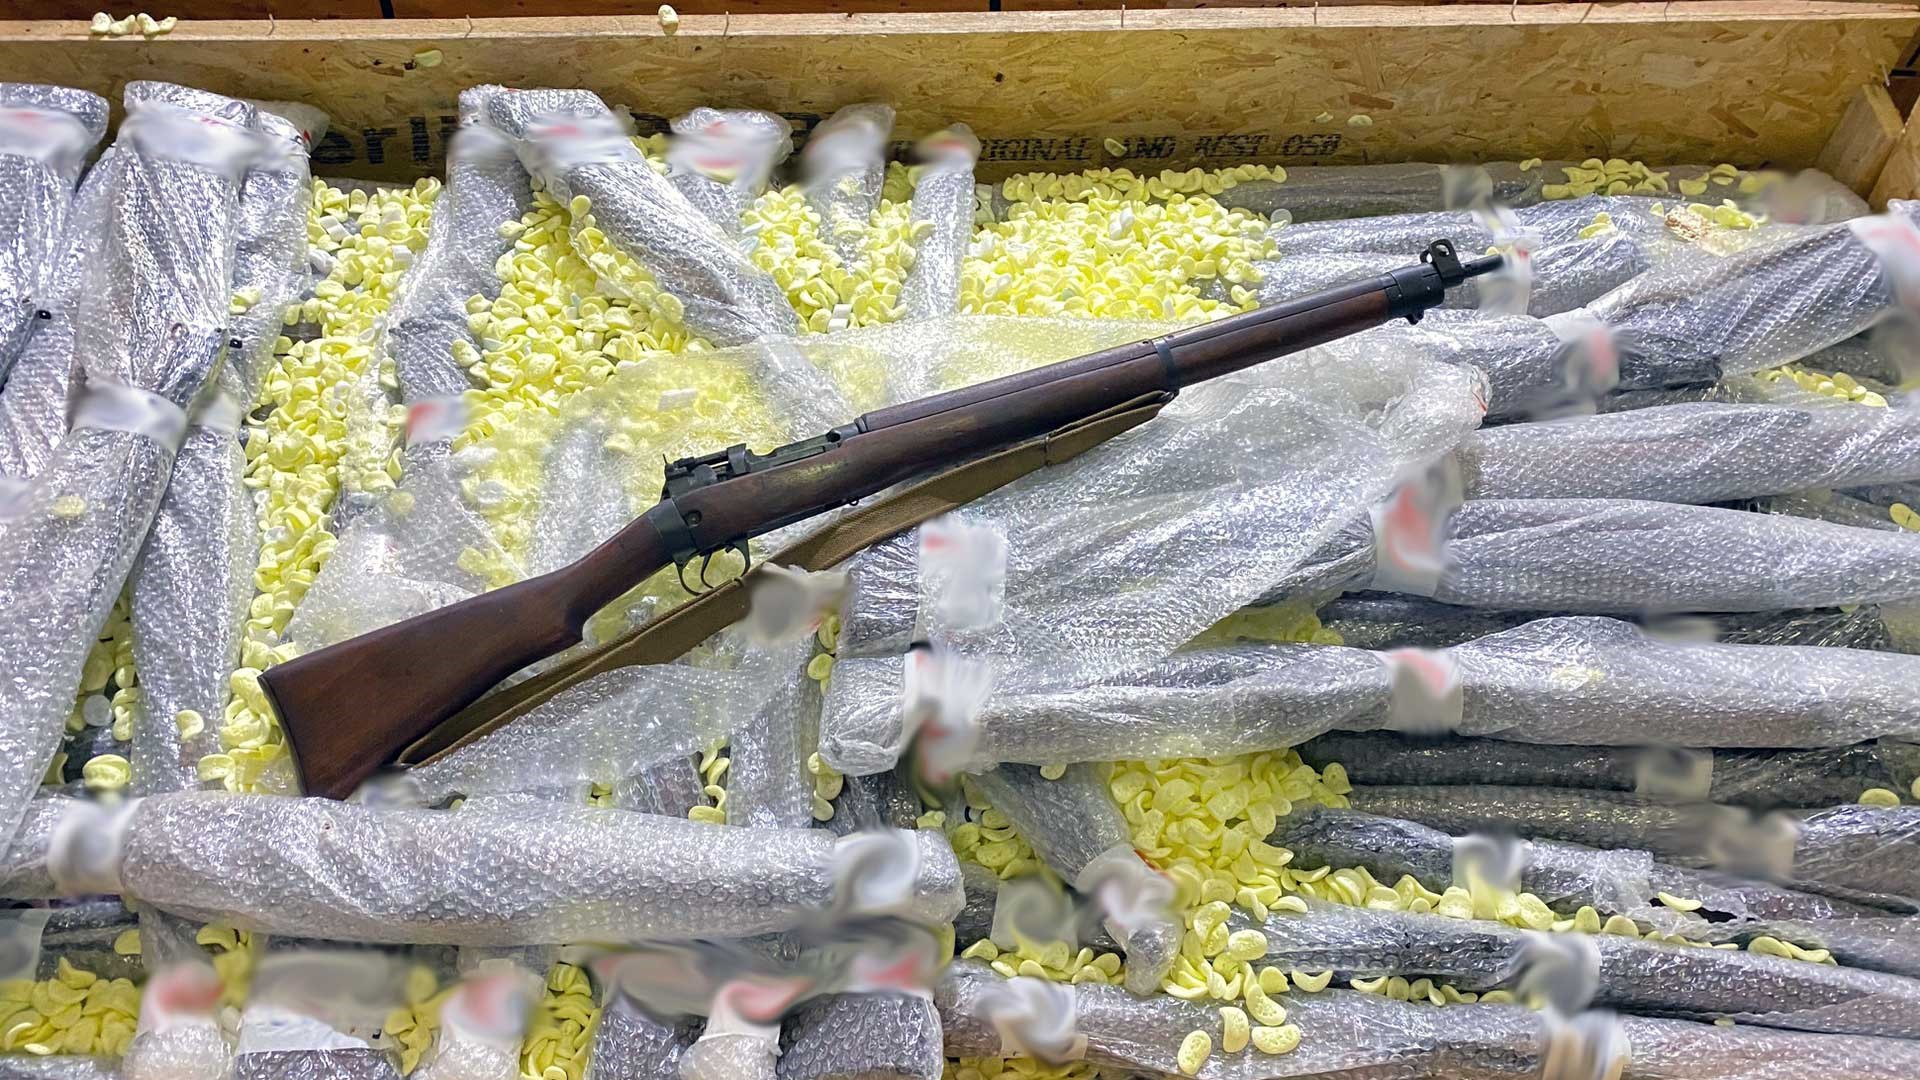 The first rifle is pulled out of its wrap and sits atop the other wrapped No. 4 rifles in one of the shipping containers. Certain identifying information has been obscured at the request of Navy Arms.